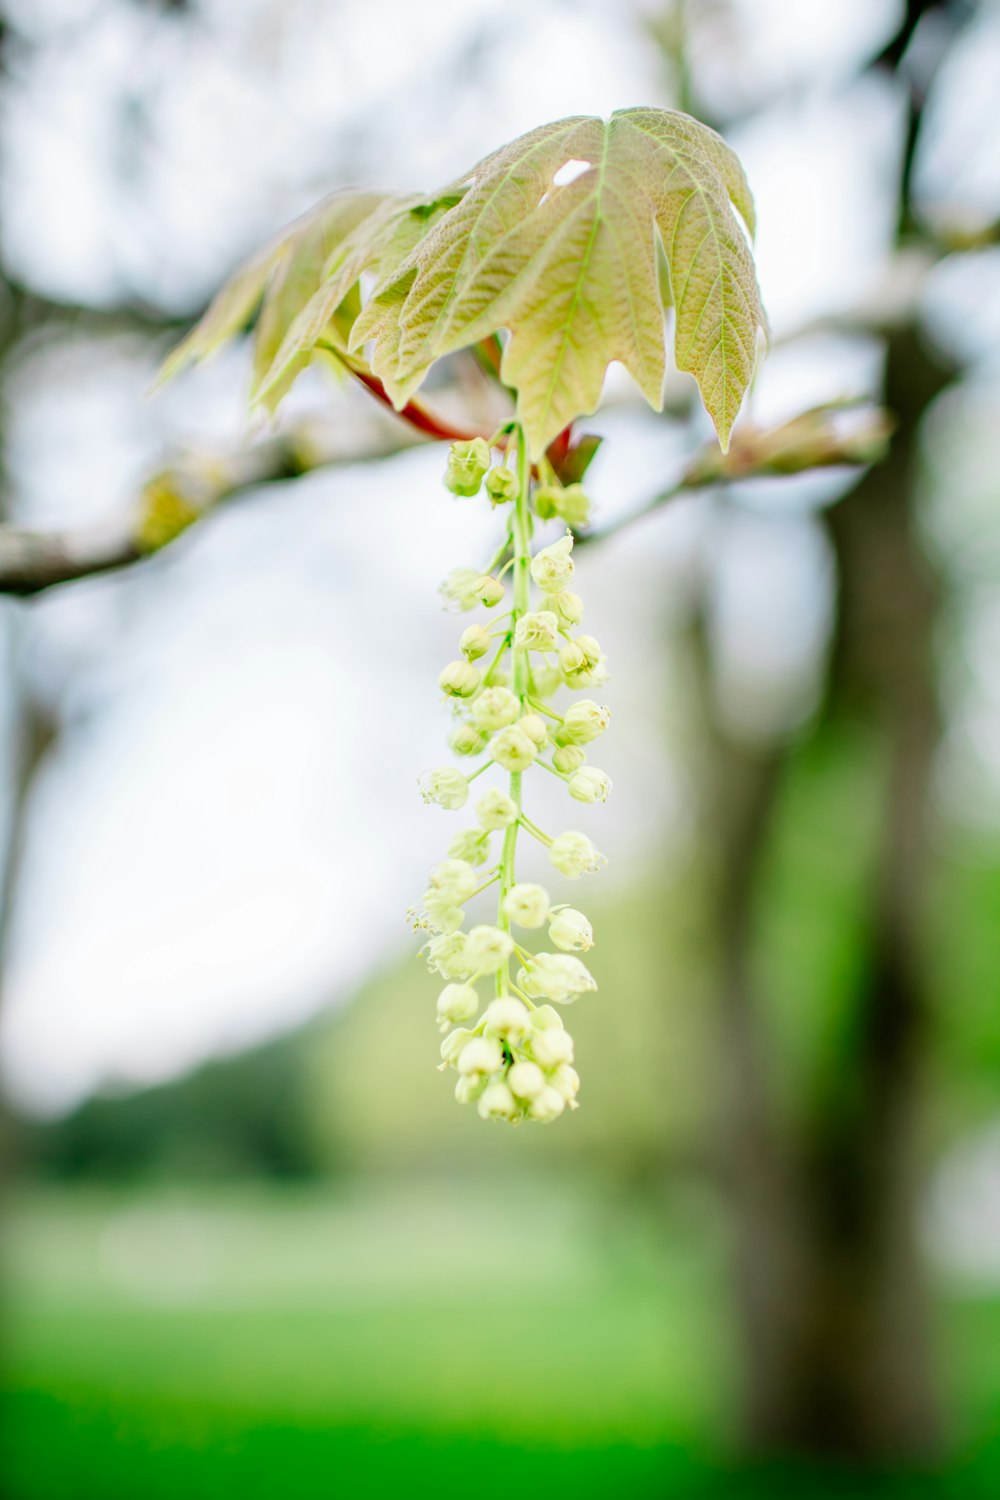 a tree branch with white flowers hanging from it